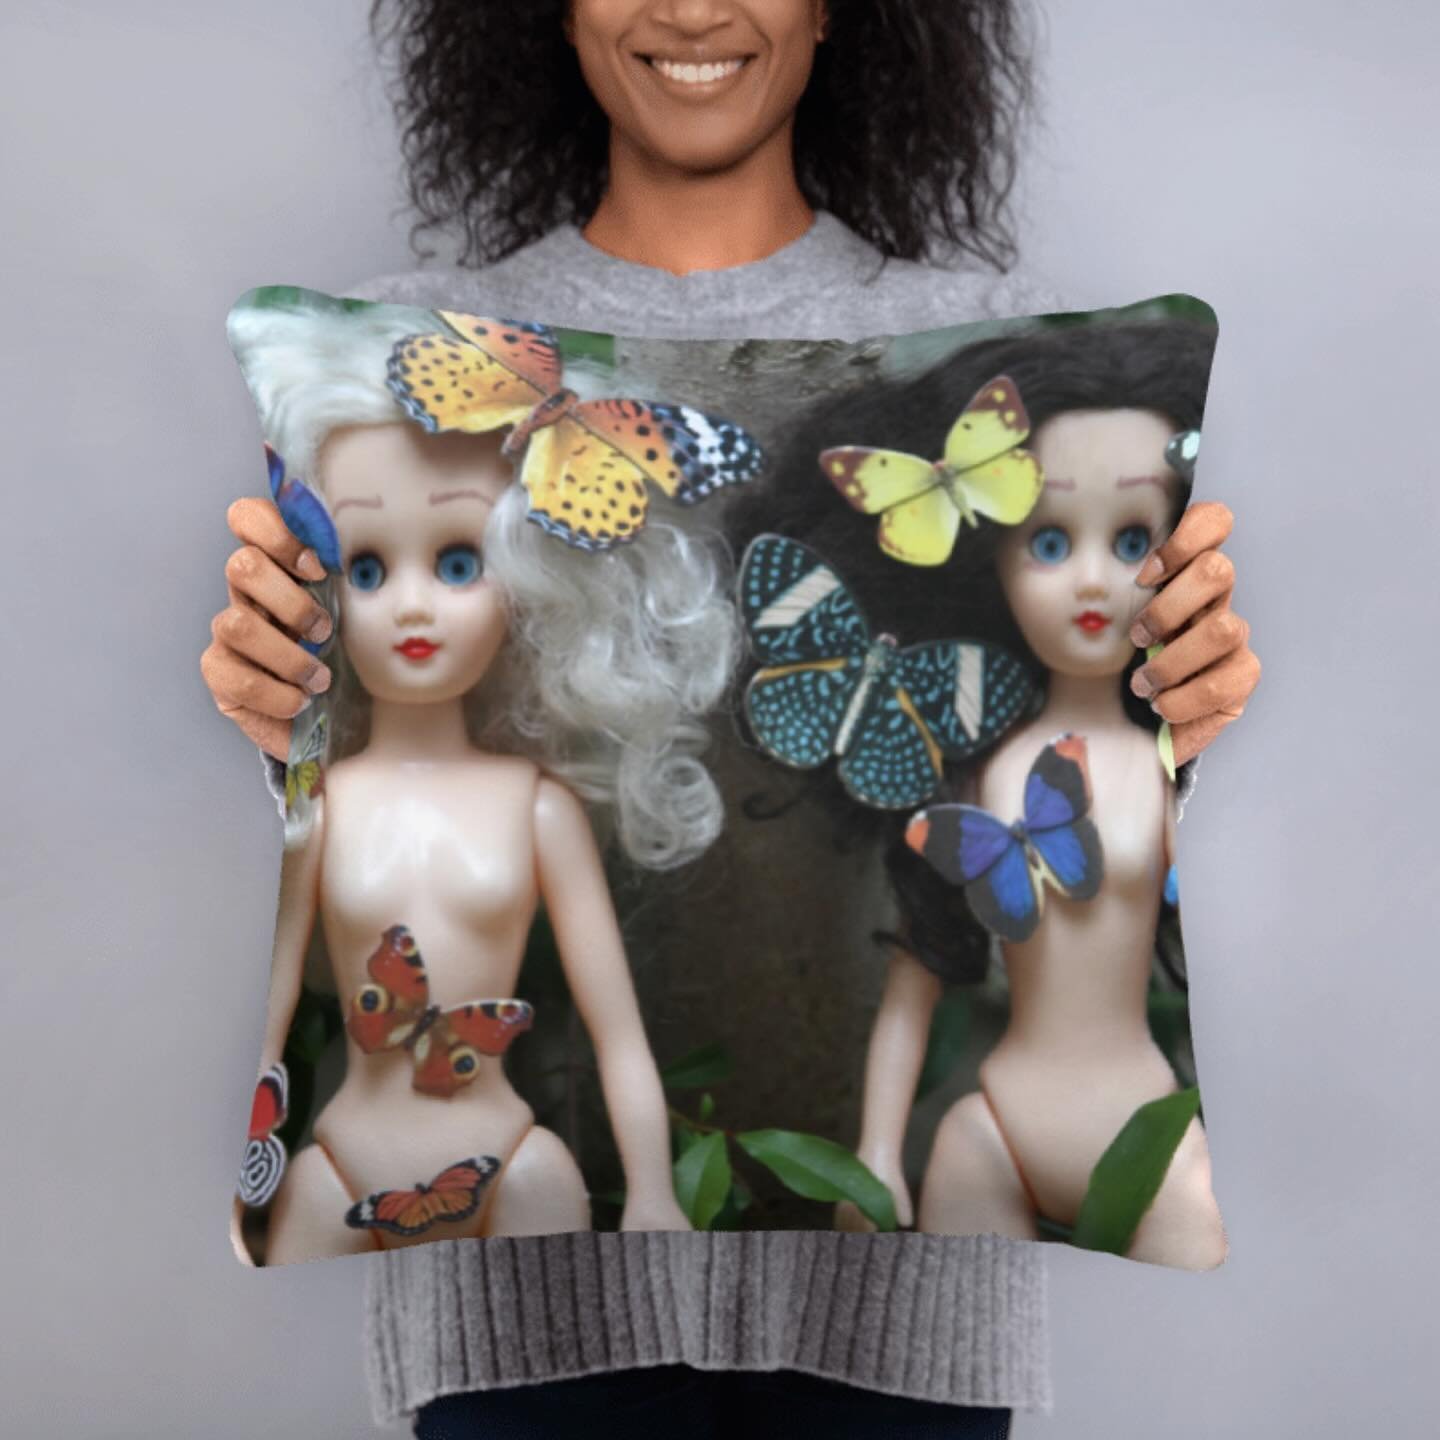 Paige &amp; Ginger throw pillows are coming soon!!

#pillow #throwpillow #homegoods #homedecor #paige #ginger #paigeandginger #adventures #naked #nude #nudistlife #dolls #dollstyle #dollstory #dollstories #dollstagram #dollsofinstagram #art